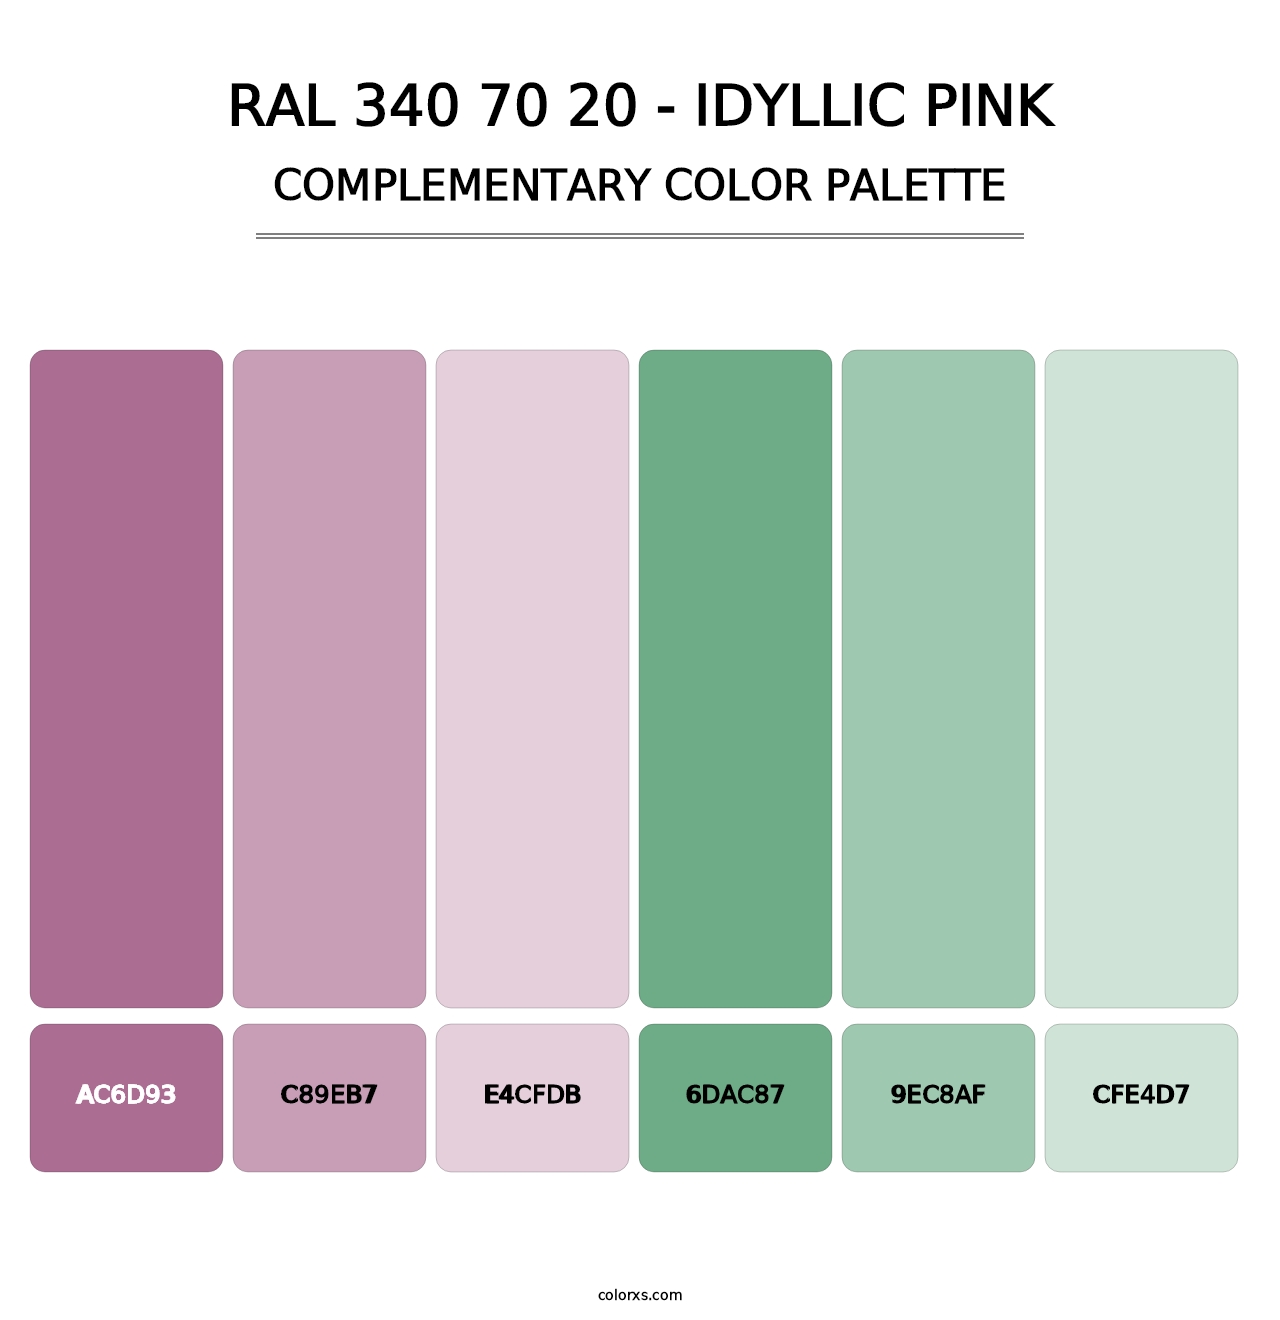 RAL 340 70 20 - Idyllic Pink - Complementary Color Palette